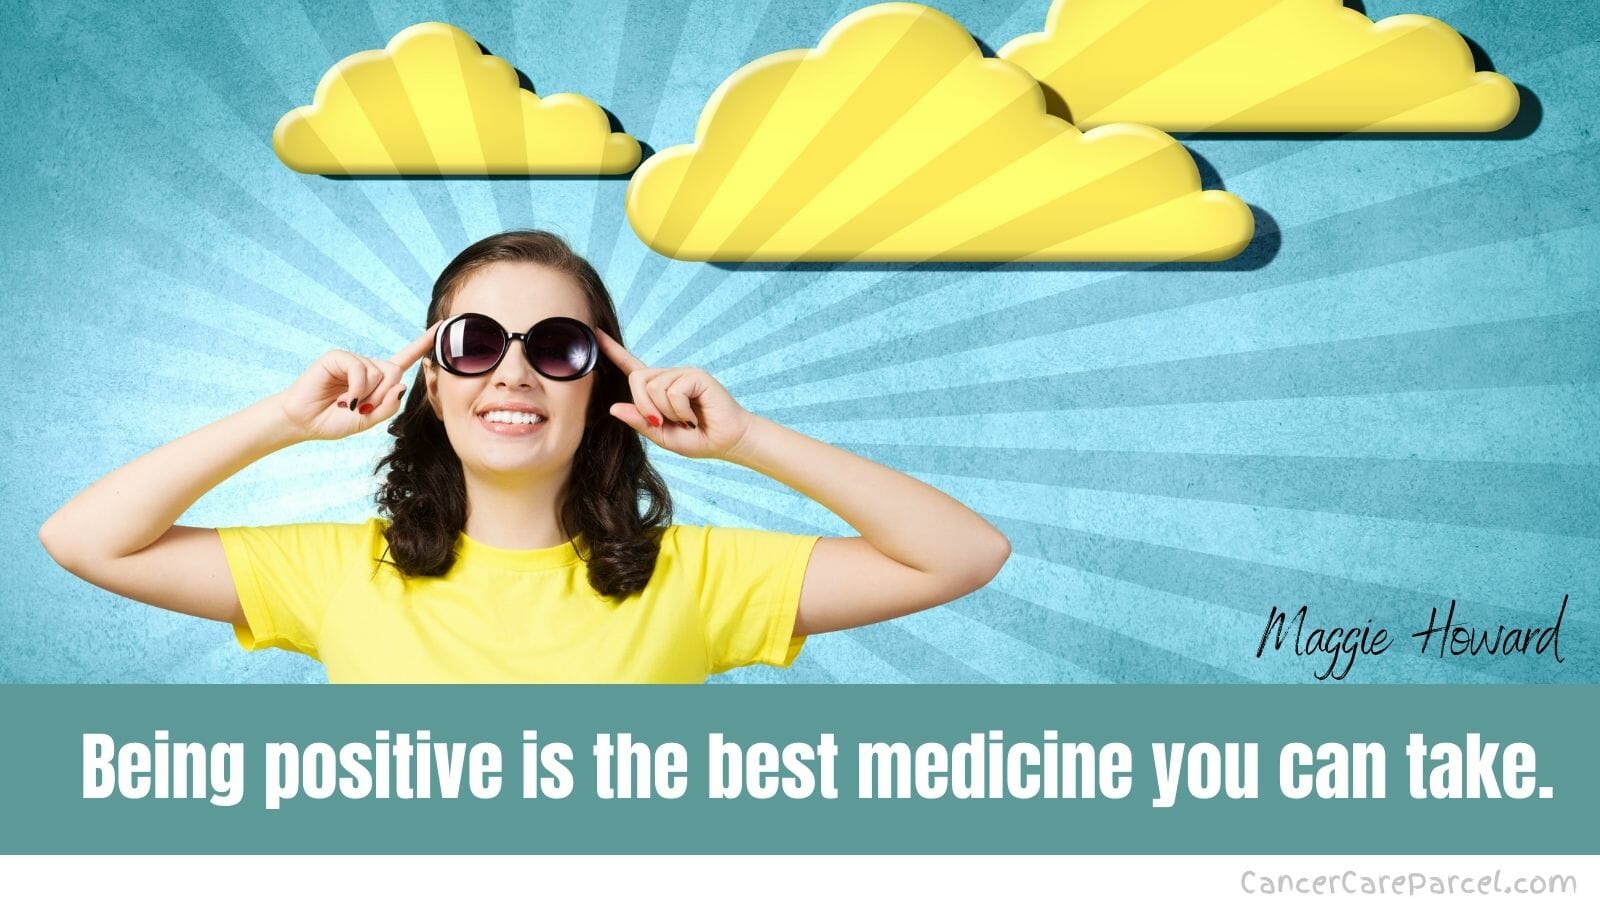 Being positive is the best medicine you can take.